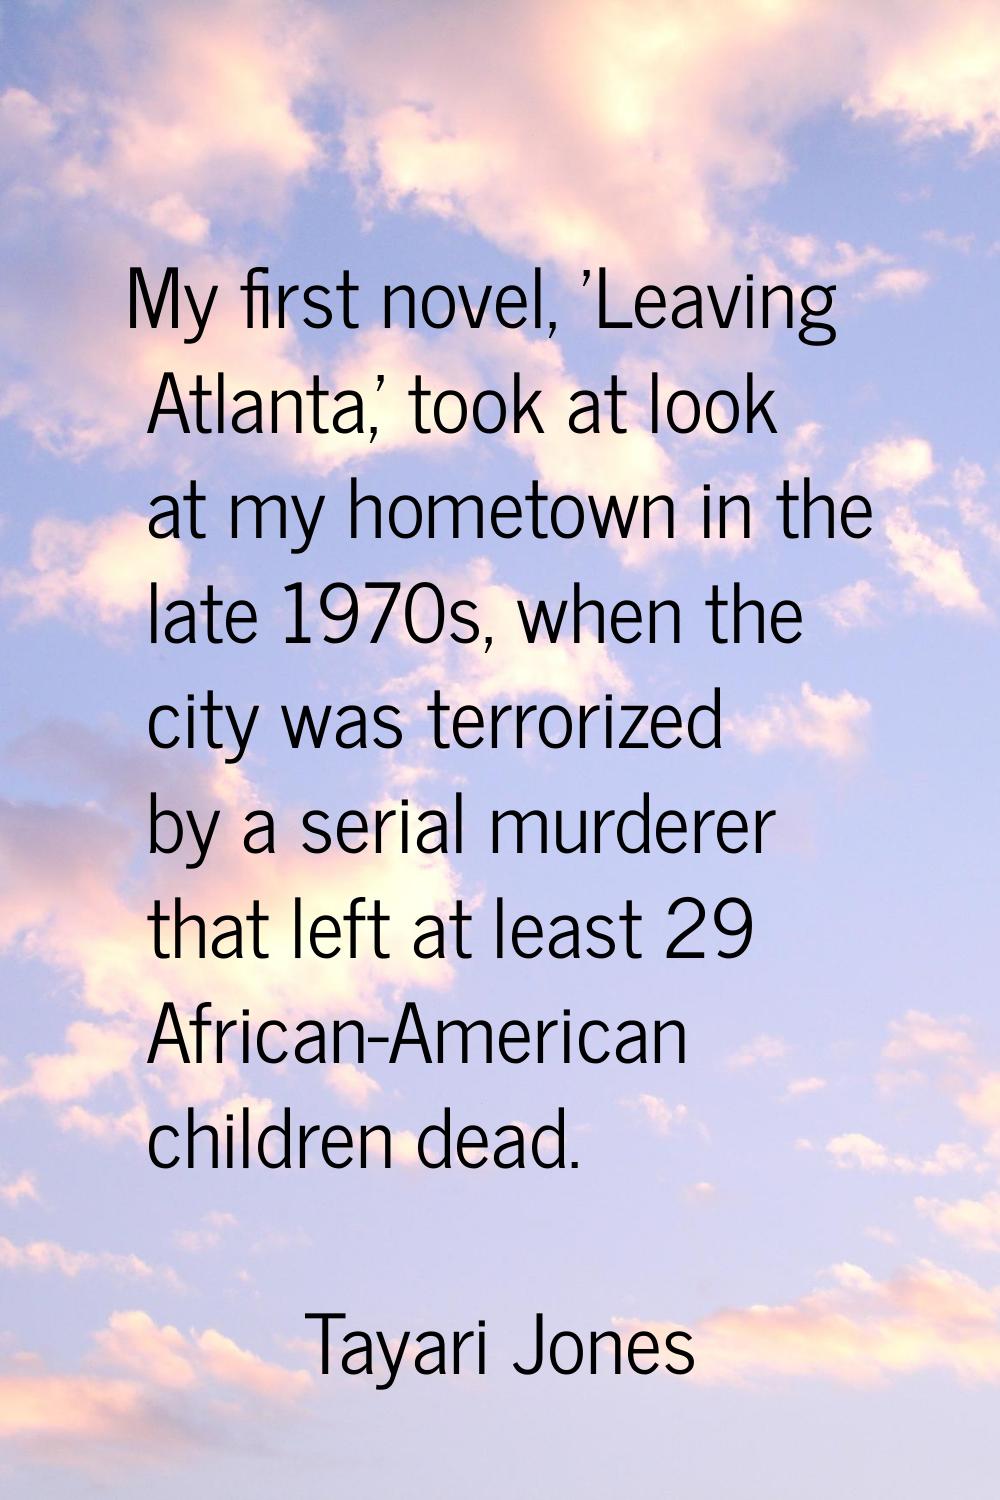 My first novel, 'Leaving Atlanta,' took at look at my hometown in the late 1970s, when the city was